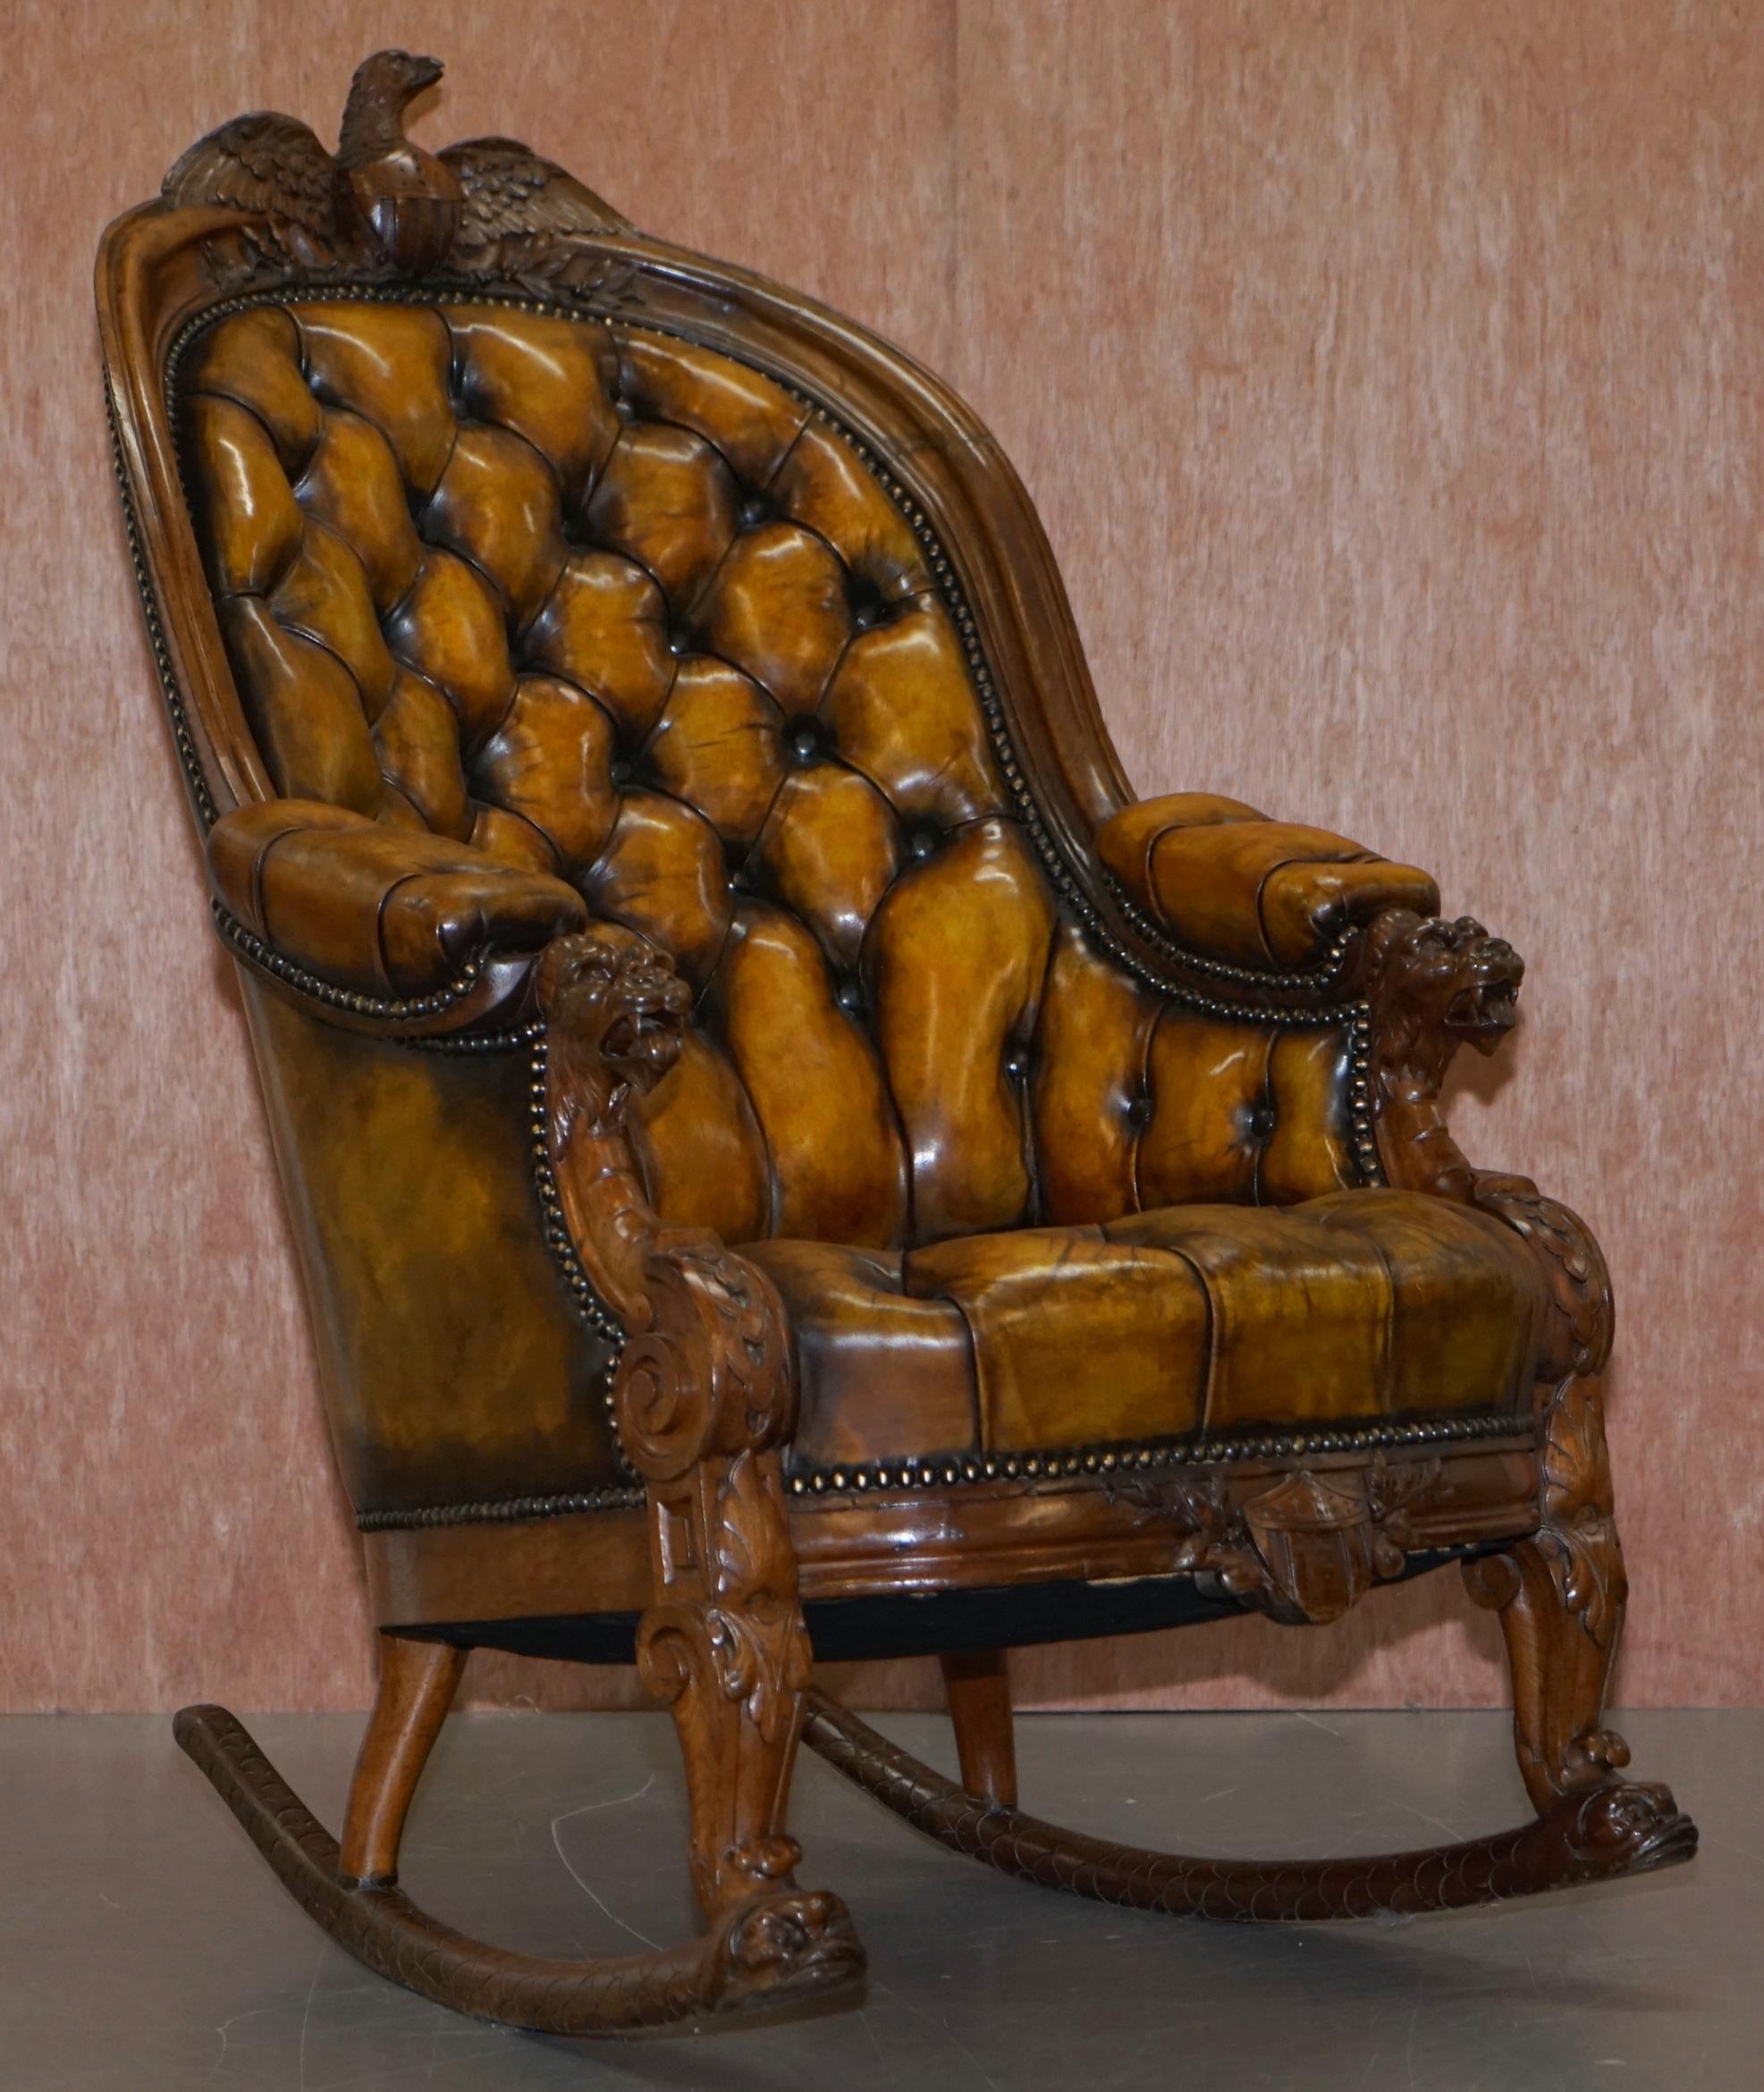 We are delighted to offer for sale this stunning and exceptionally rare original William IV 1830 American Eagle carved with 13 star flag rocking armchair with Chesterfield tufted leather

Where to begin! The only one of its kind in the world, I’ve